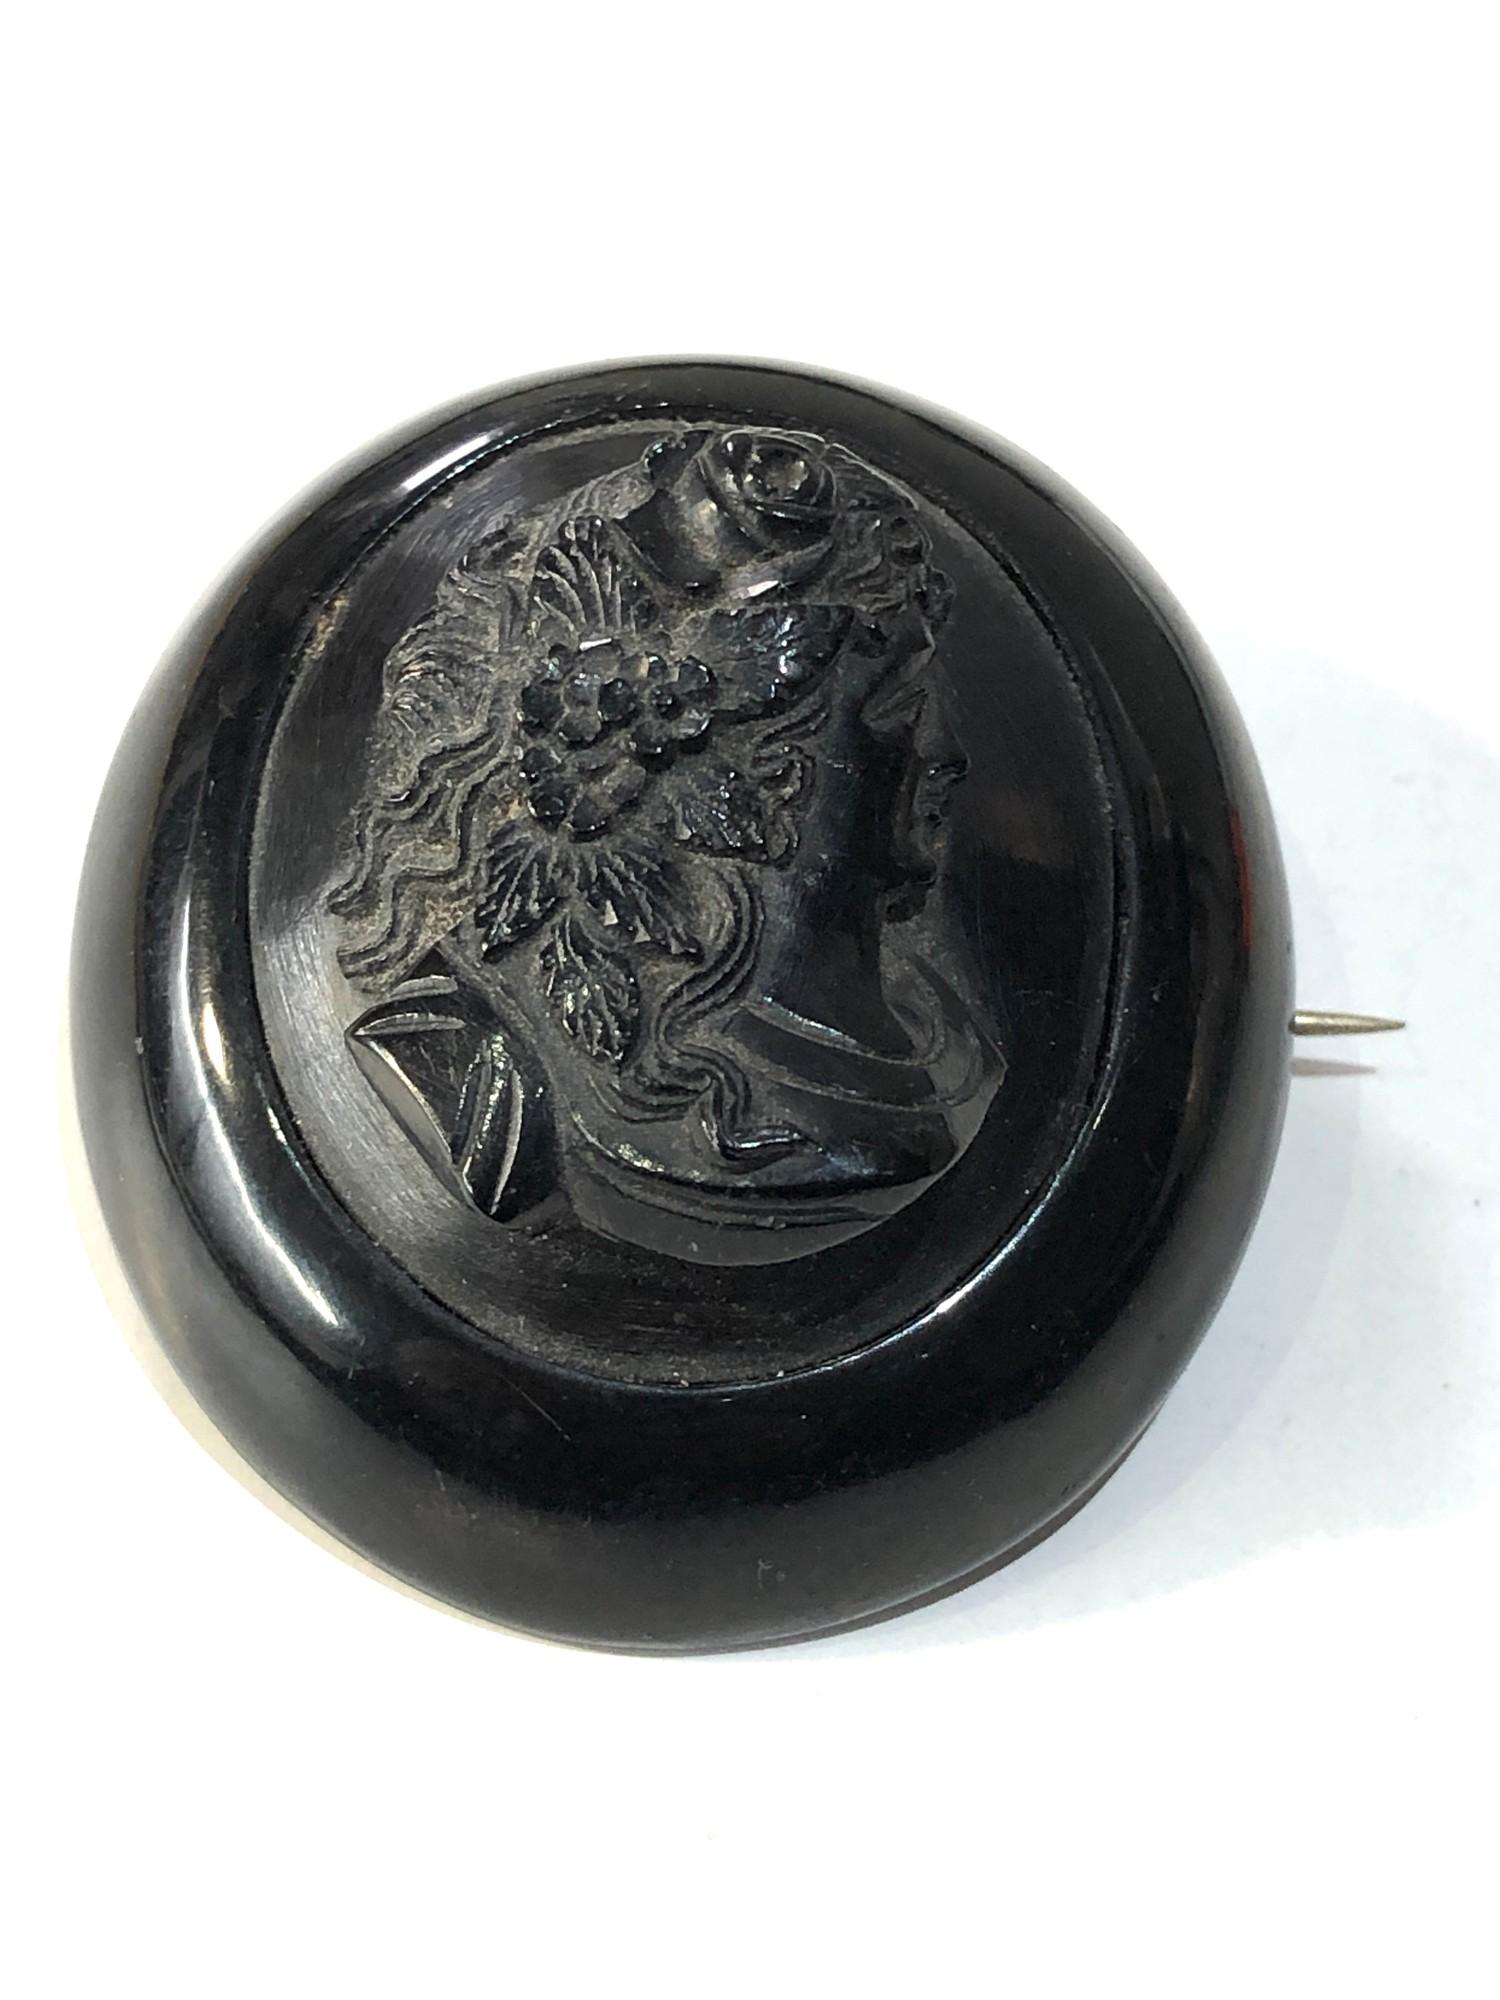 large victorin jet cameo pendant / brooch measures approx 5.4cm by 4.8cm in good condition